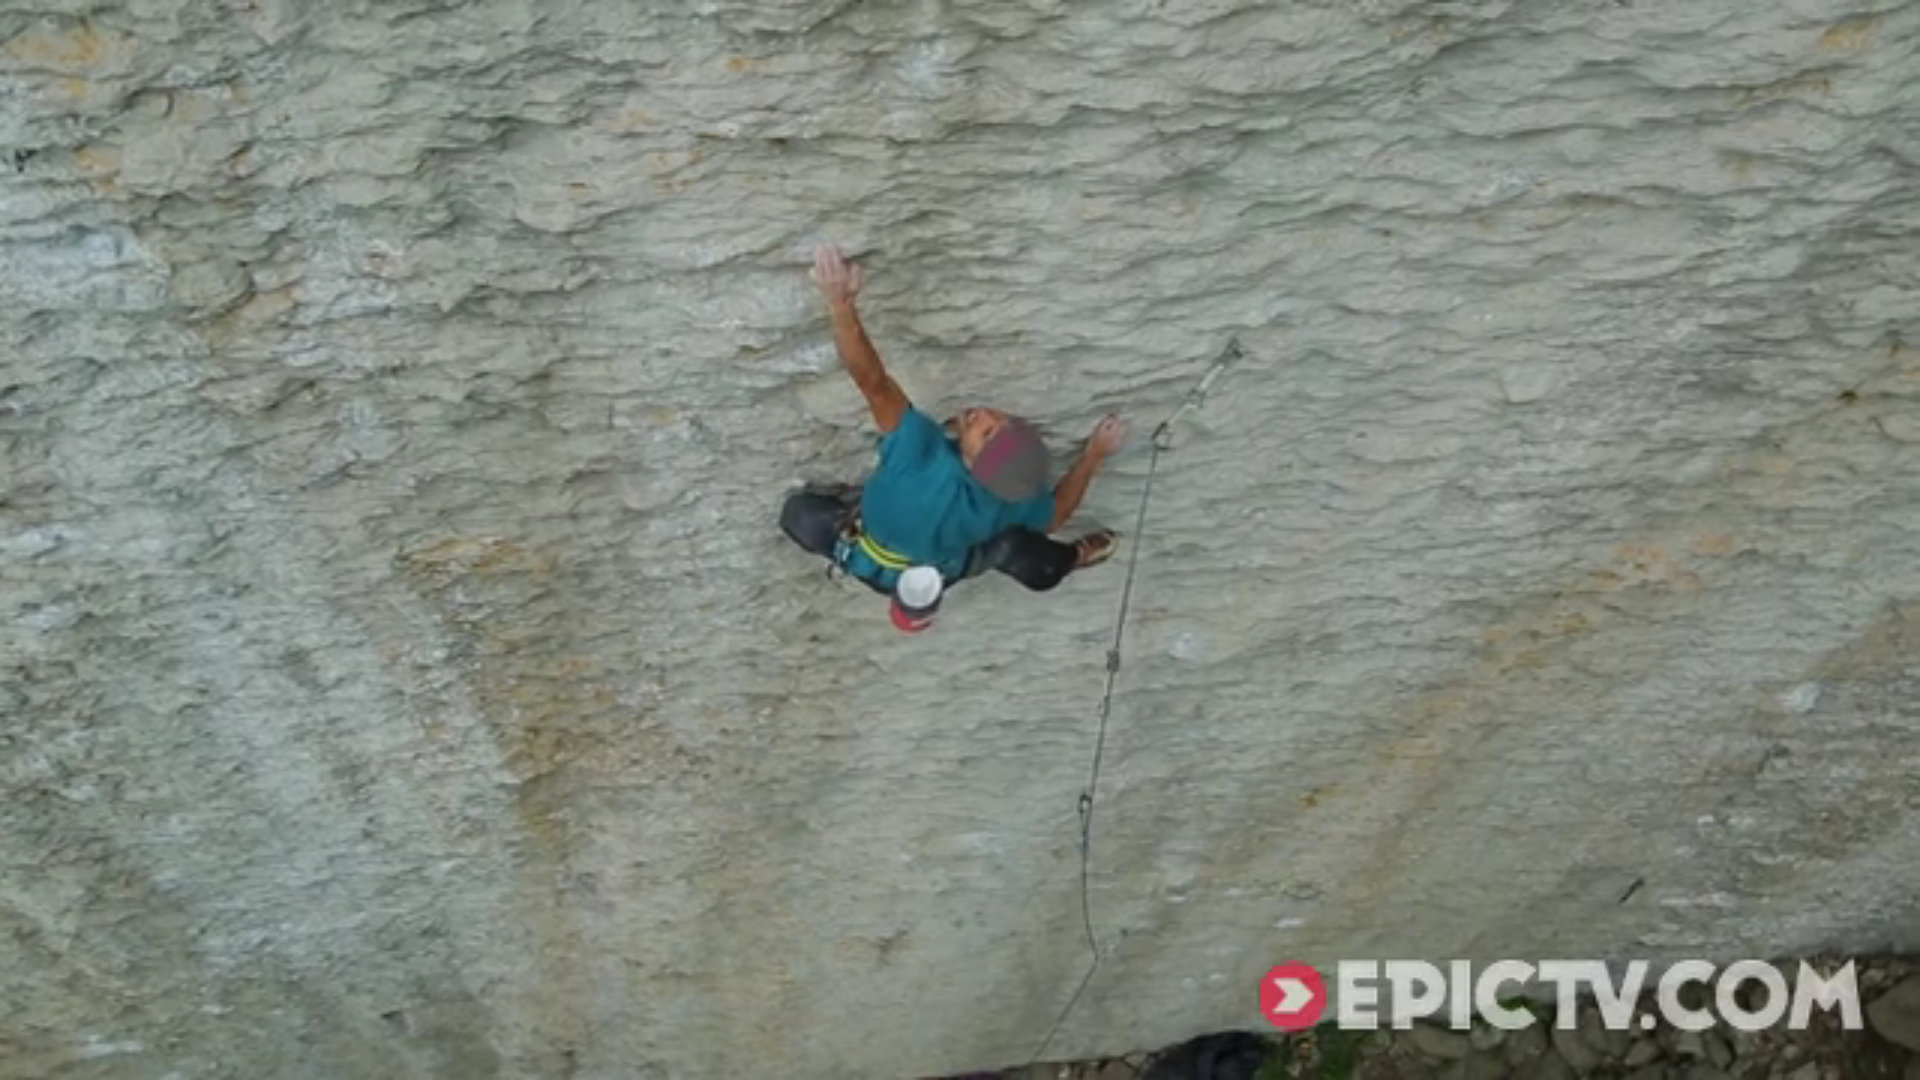 [VIDEO] Jonathan Siegrist Breaks The 'Speed' Limit | Nomad